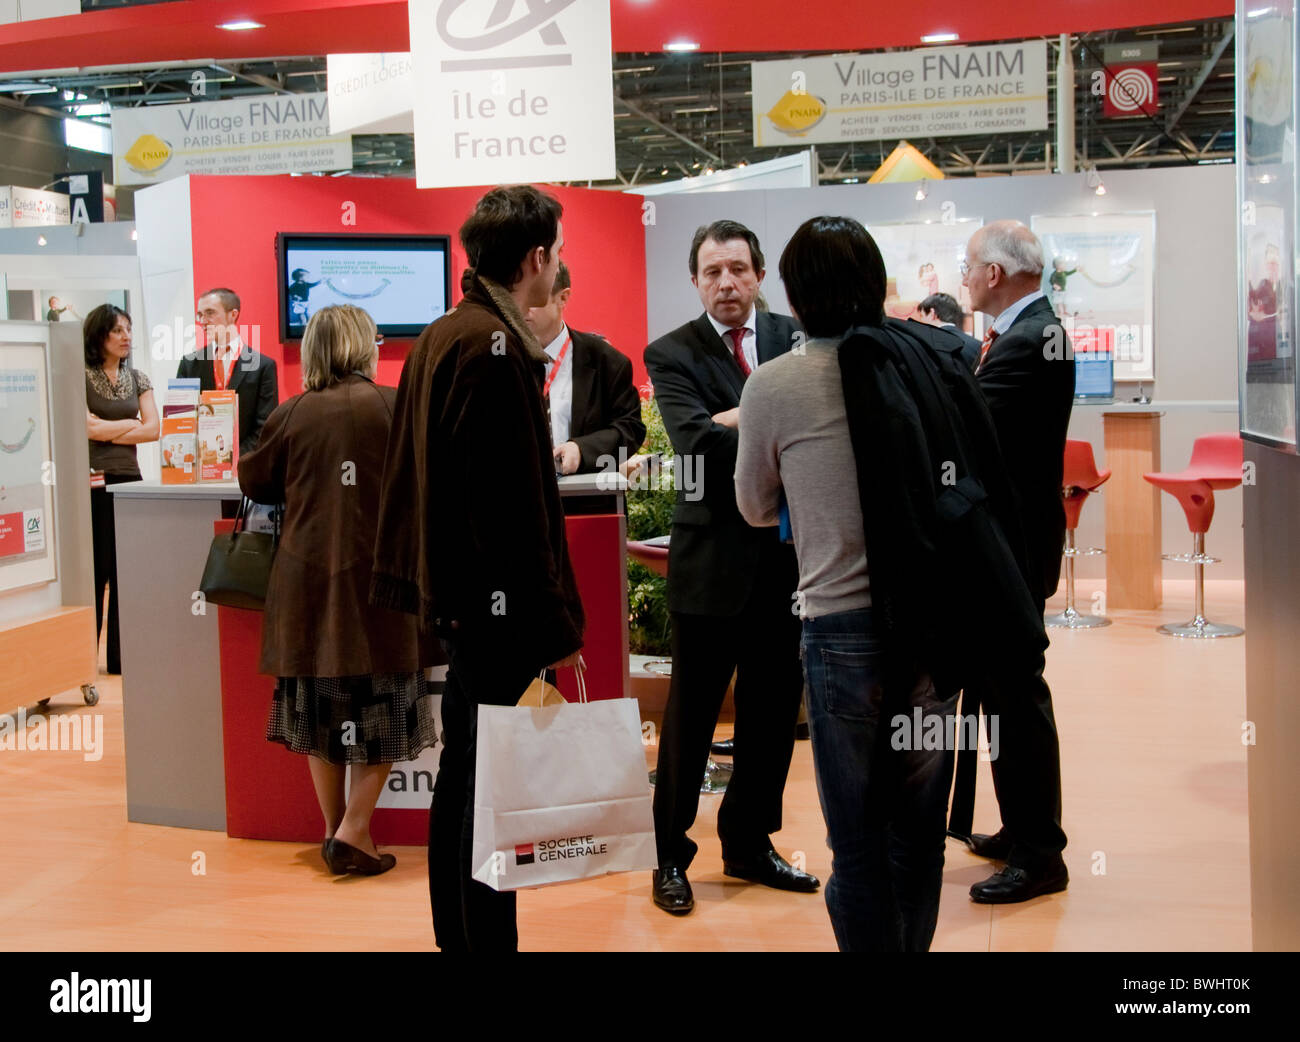 Paris, France -  Small Group People Talking, Behind, Interior View of Paris Real Estate Trade Show,  Business Meeting, French Bank, 'Credit Agricole' Trade Show Stock Photo